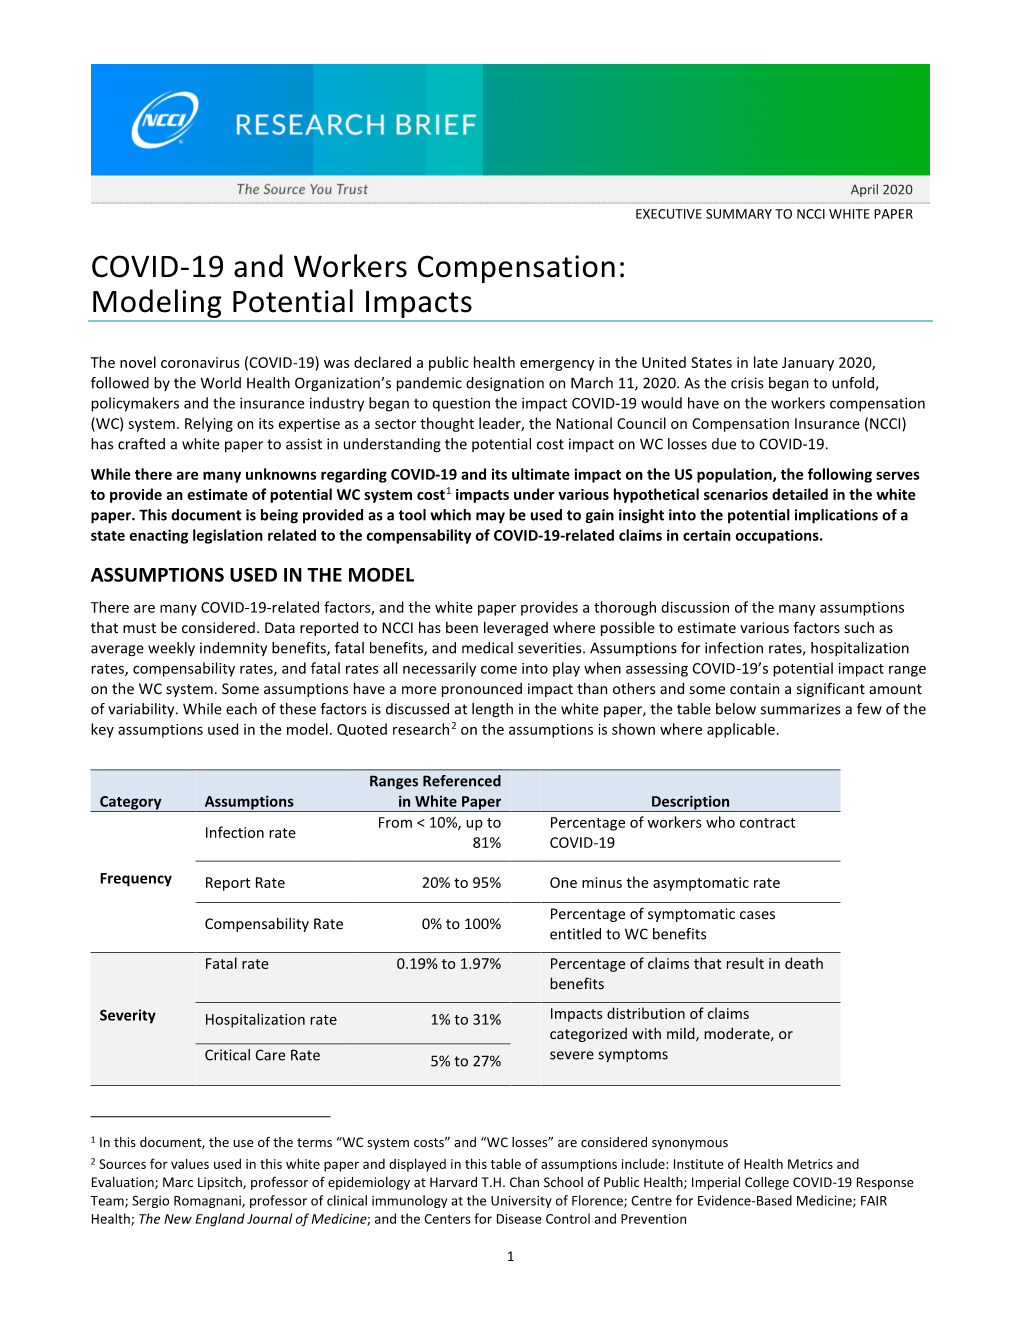 COVID-19 and Workers Compensation: Modeling Potential Impacts